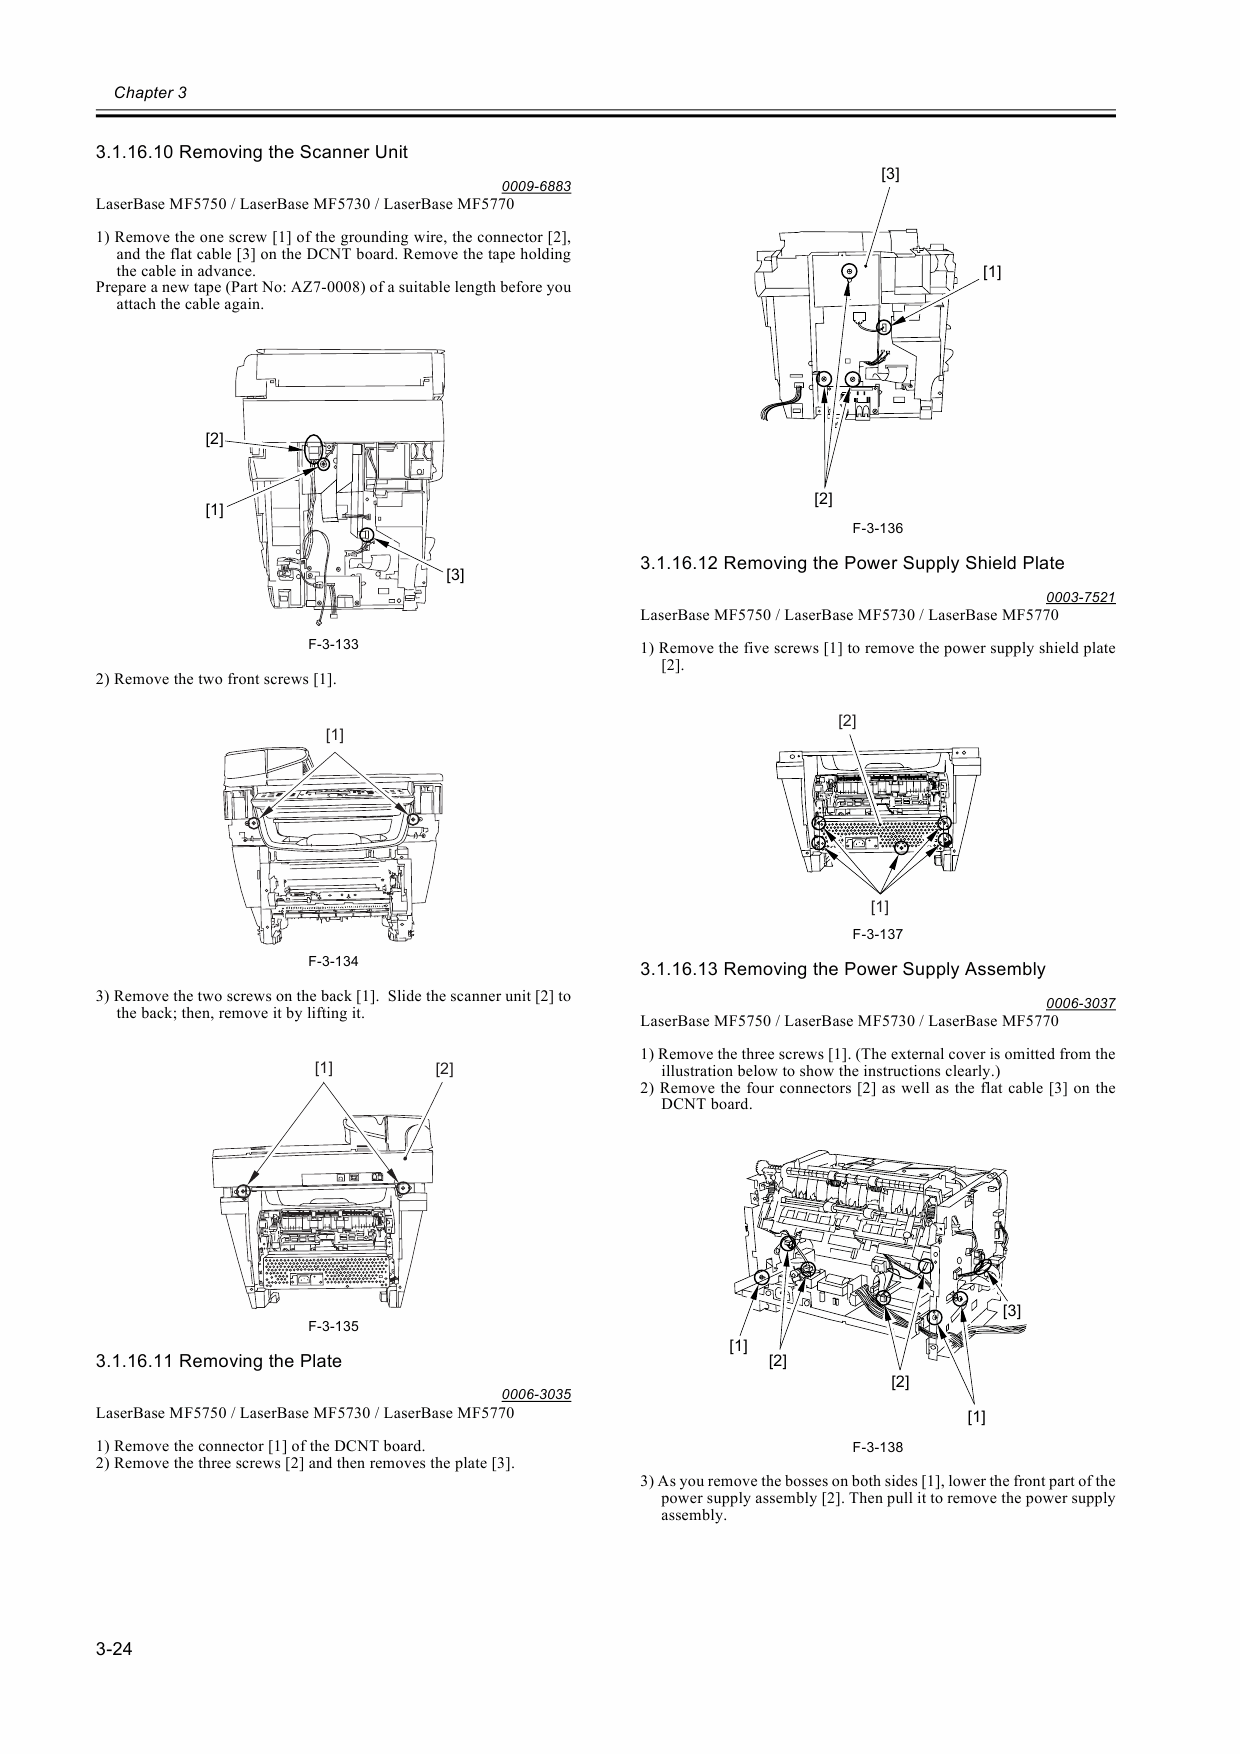 Canon imageCLASS MF-5700 Service and Parts Manual-2